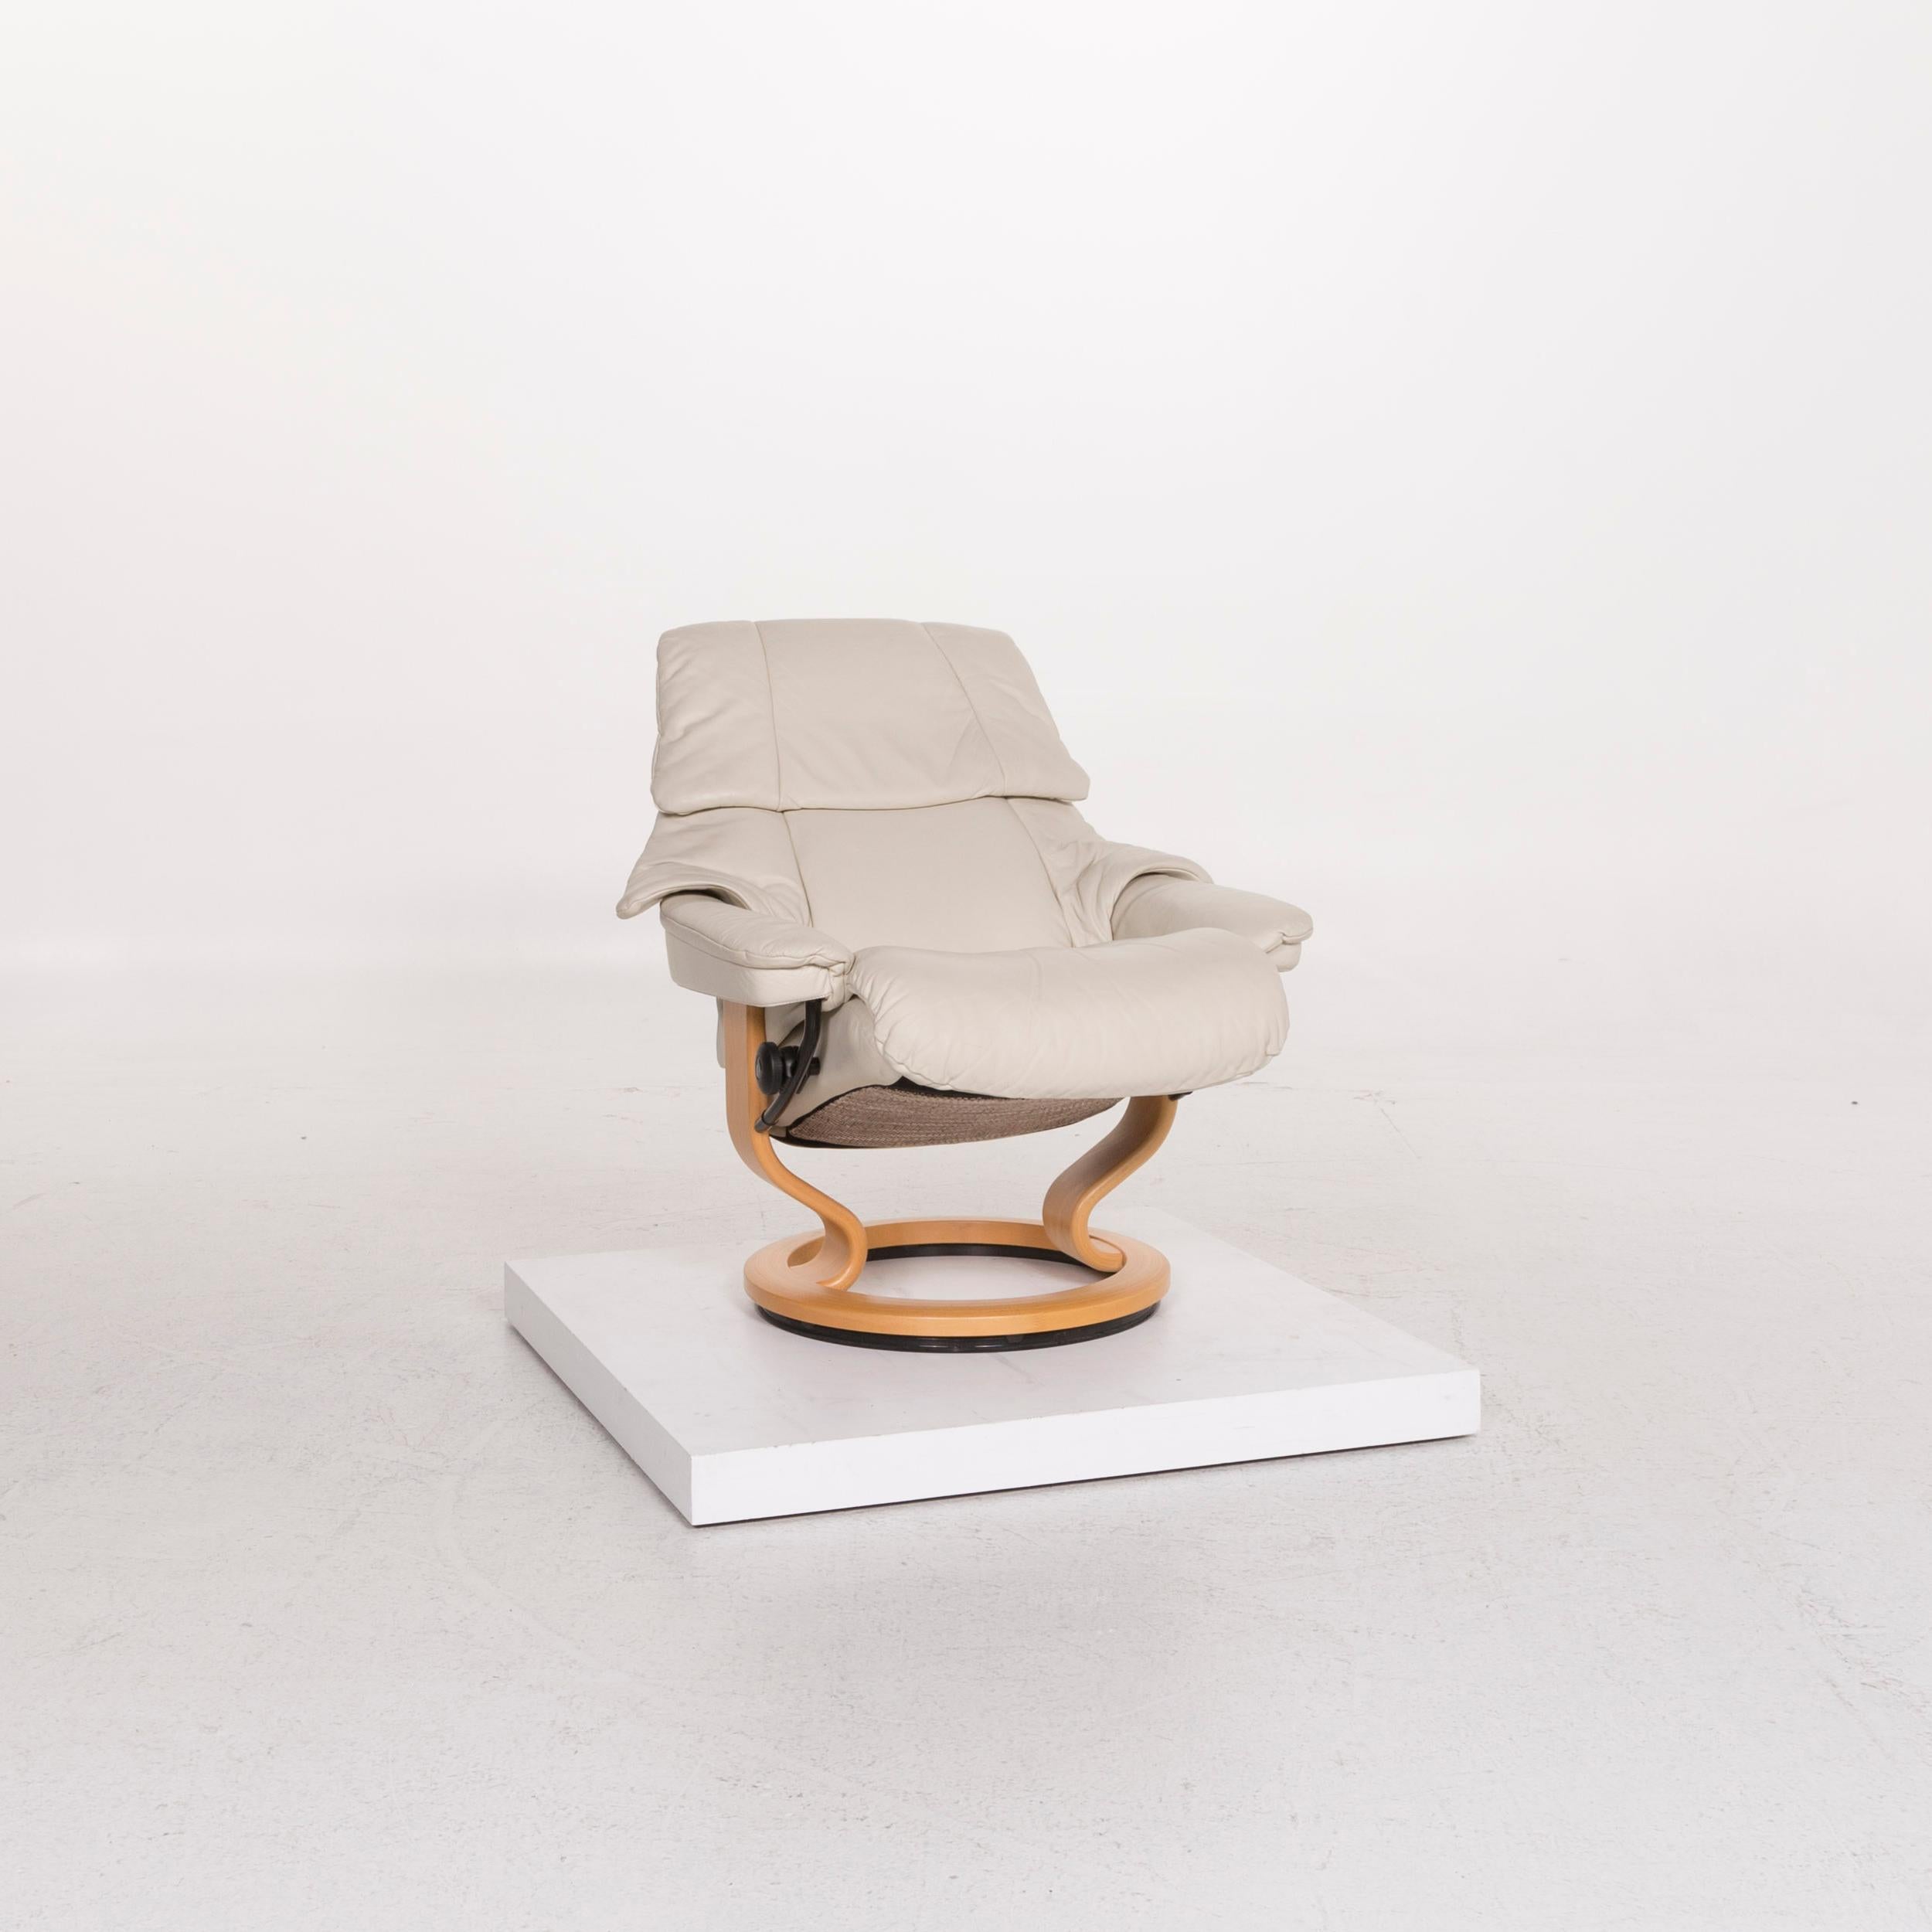 We bring to you a Stressless Reno leather armchair cream armchair set including relax function.
 

 Product measurements in centimeters:
 

Depth 75
Width 80
Height 96
Seat-height 42
Rest-height 55
Seat-depth 48
Seat-width